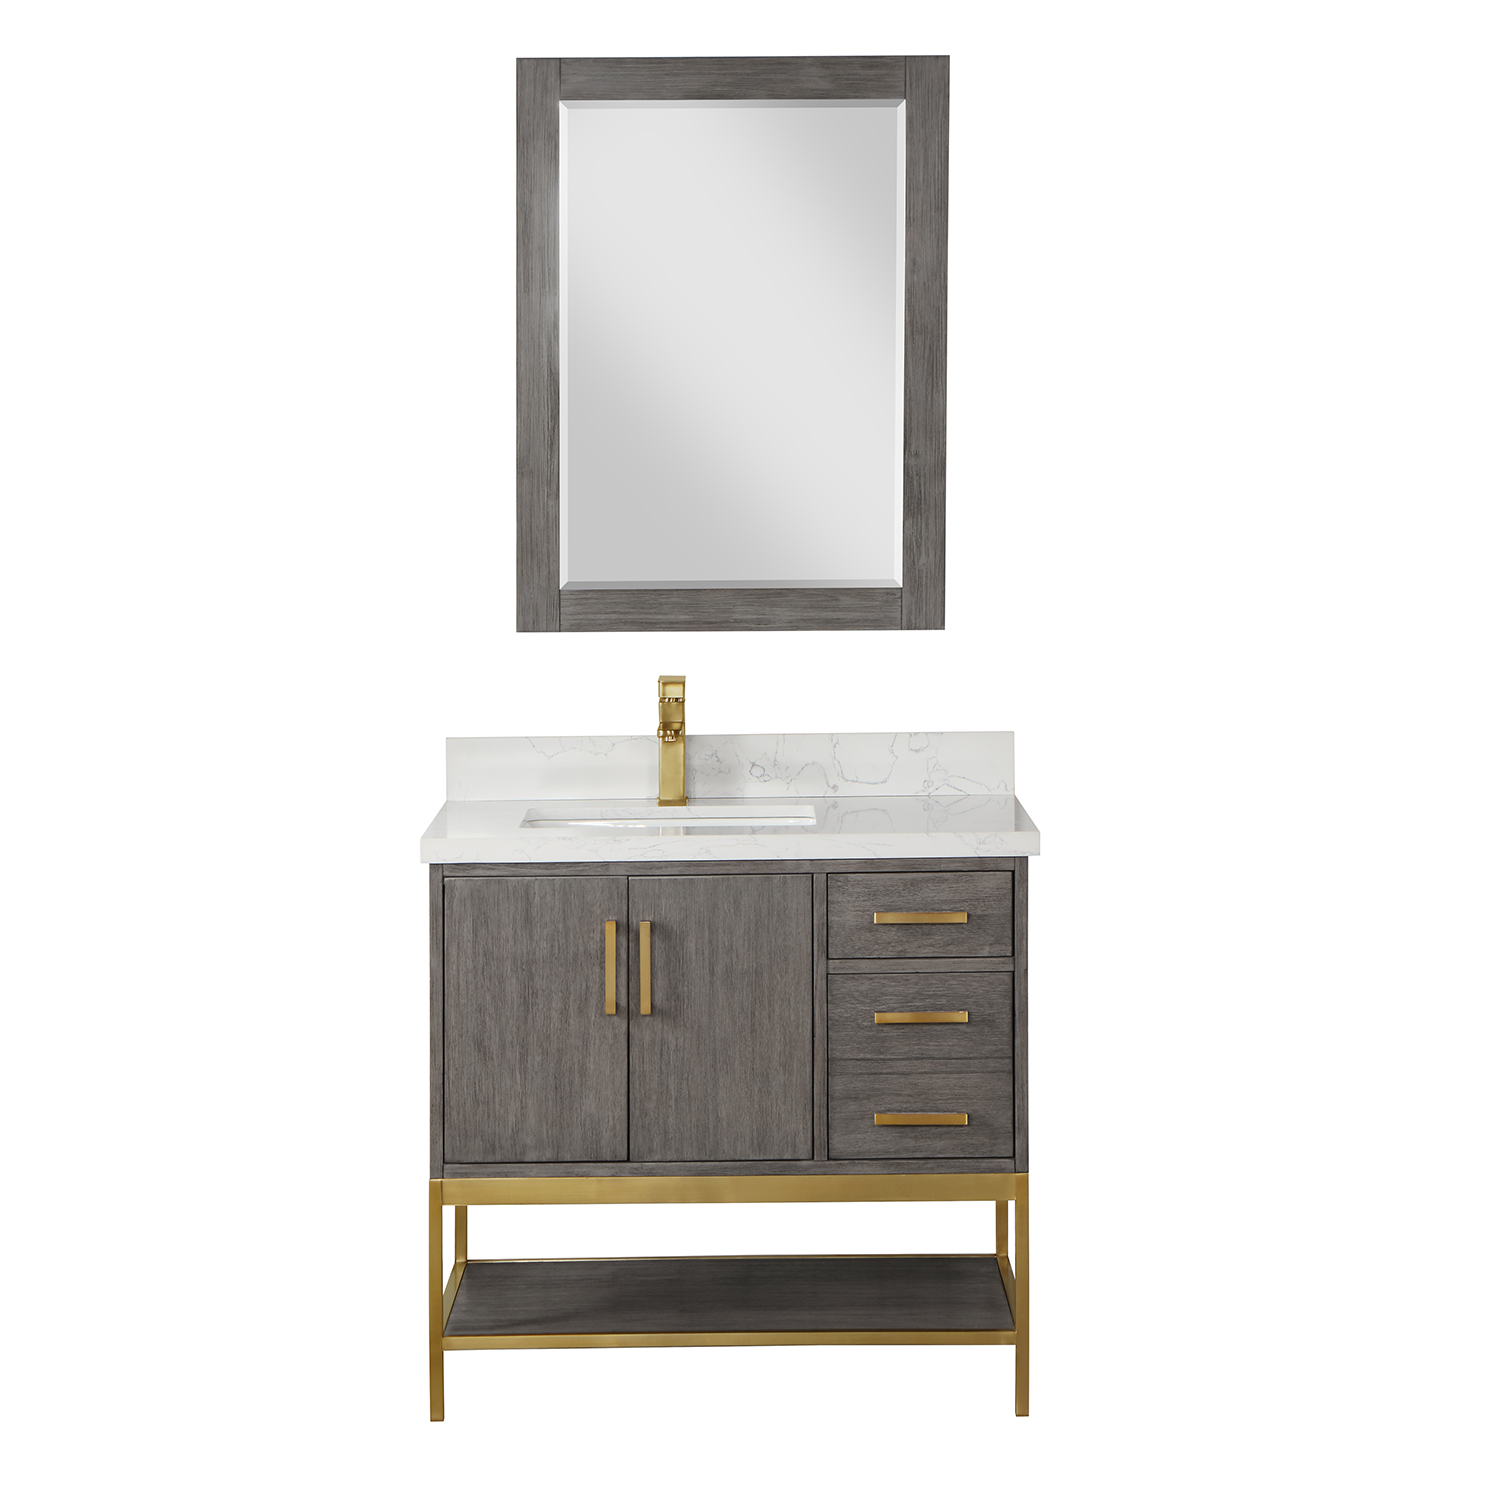 Issac Edwards Collection 36" Single Bathroom Vanity Set in Classical Grey with Grain White Composite Stone Countertop without Mirror  